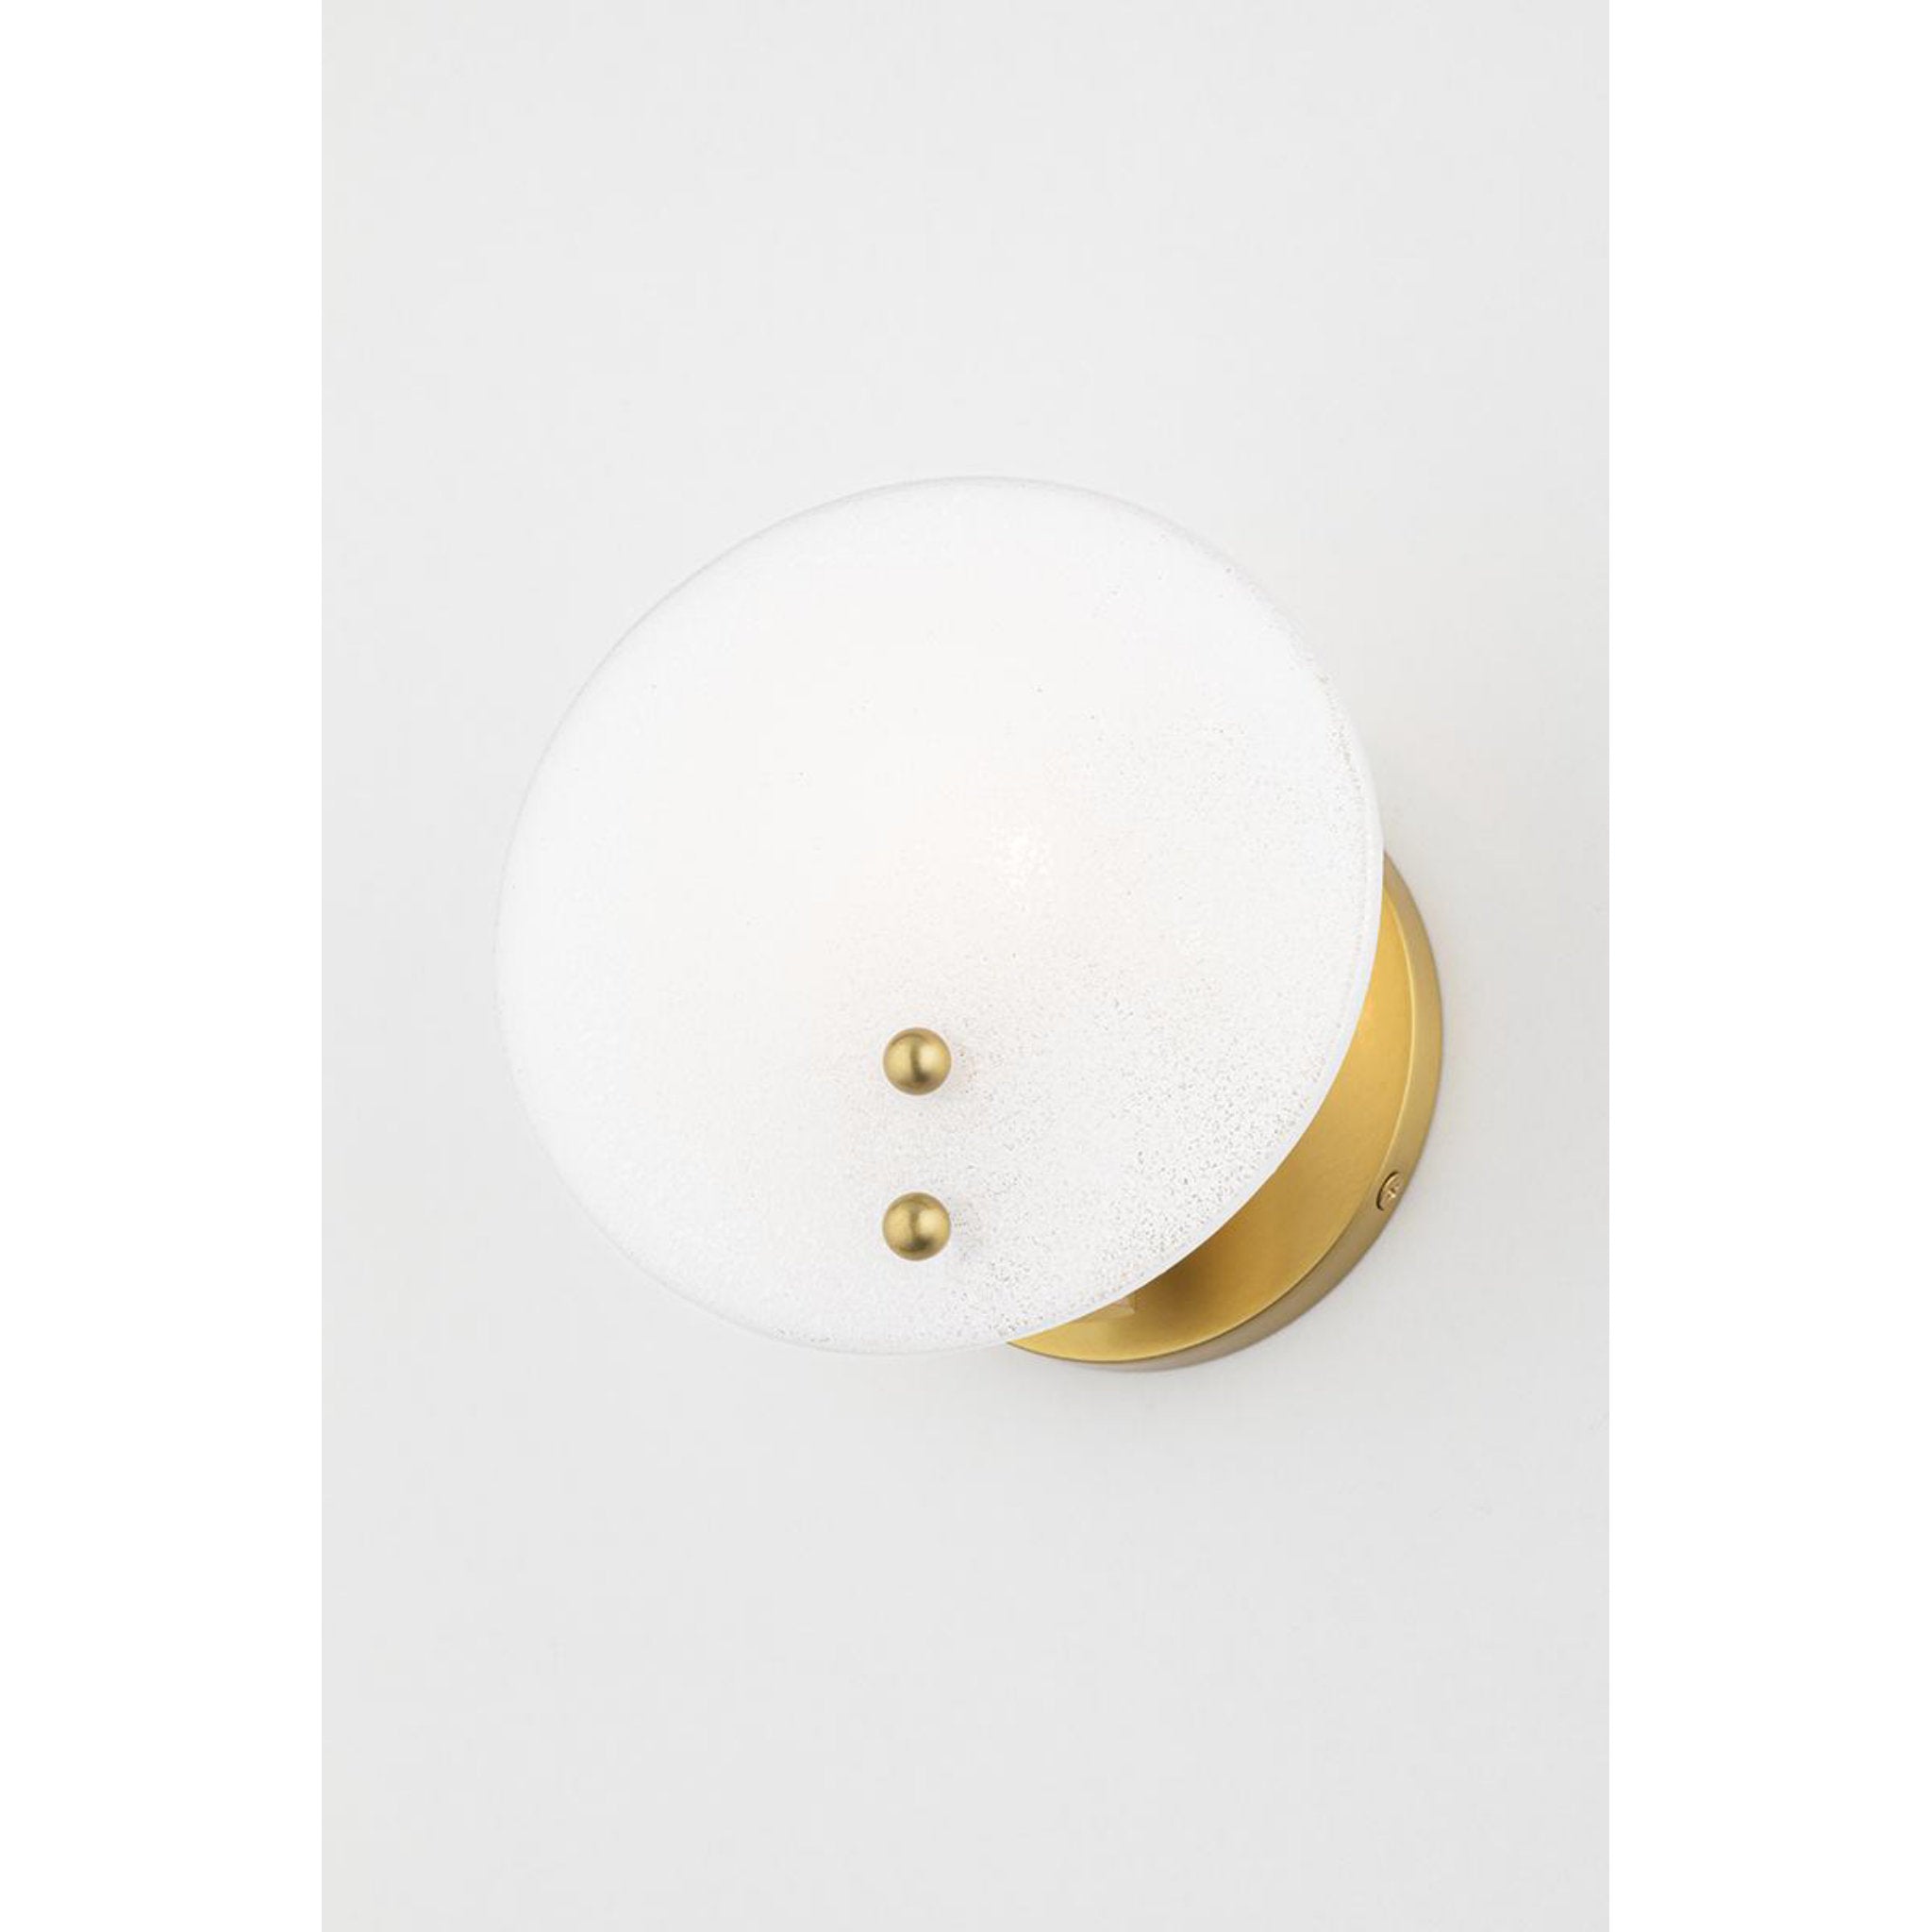 Giselle 1-Light Wall Sconce in Old Bronze